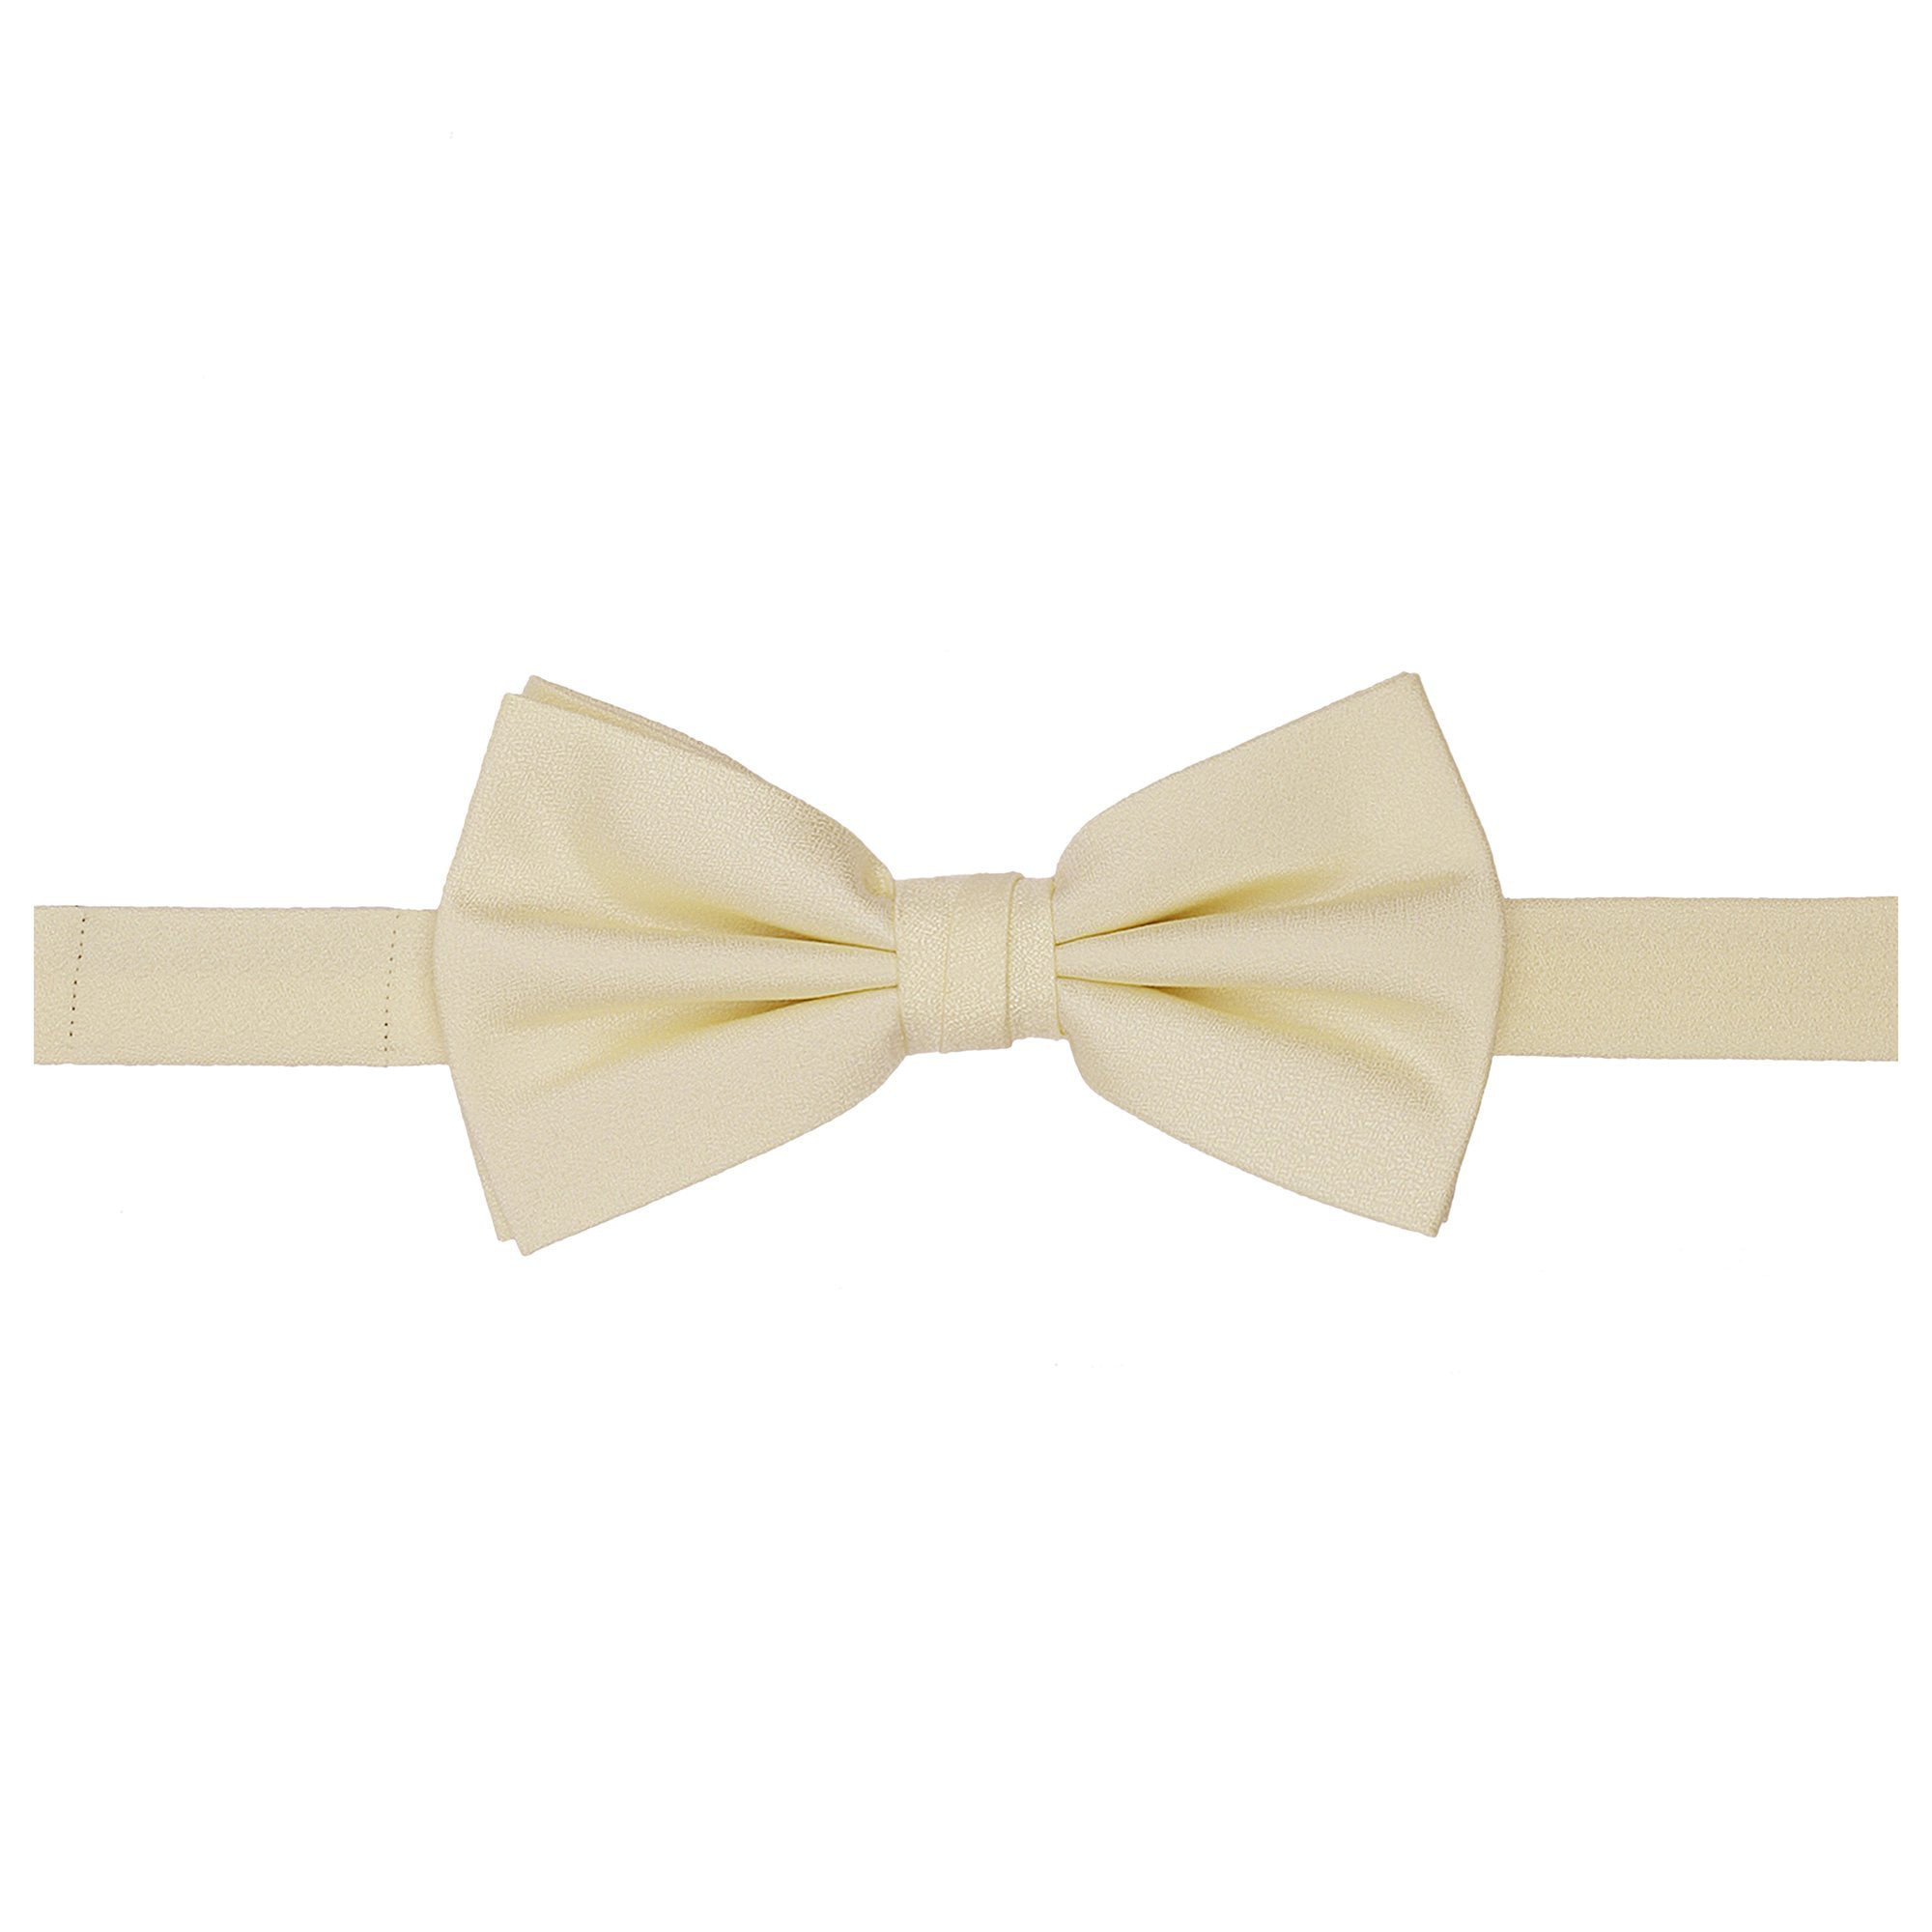 BOYS GOLD BOW TIE Little Baby Toddler Kids Adjustable Pretied Champagne Metallic 